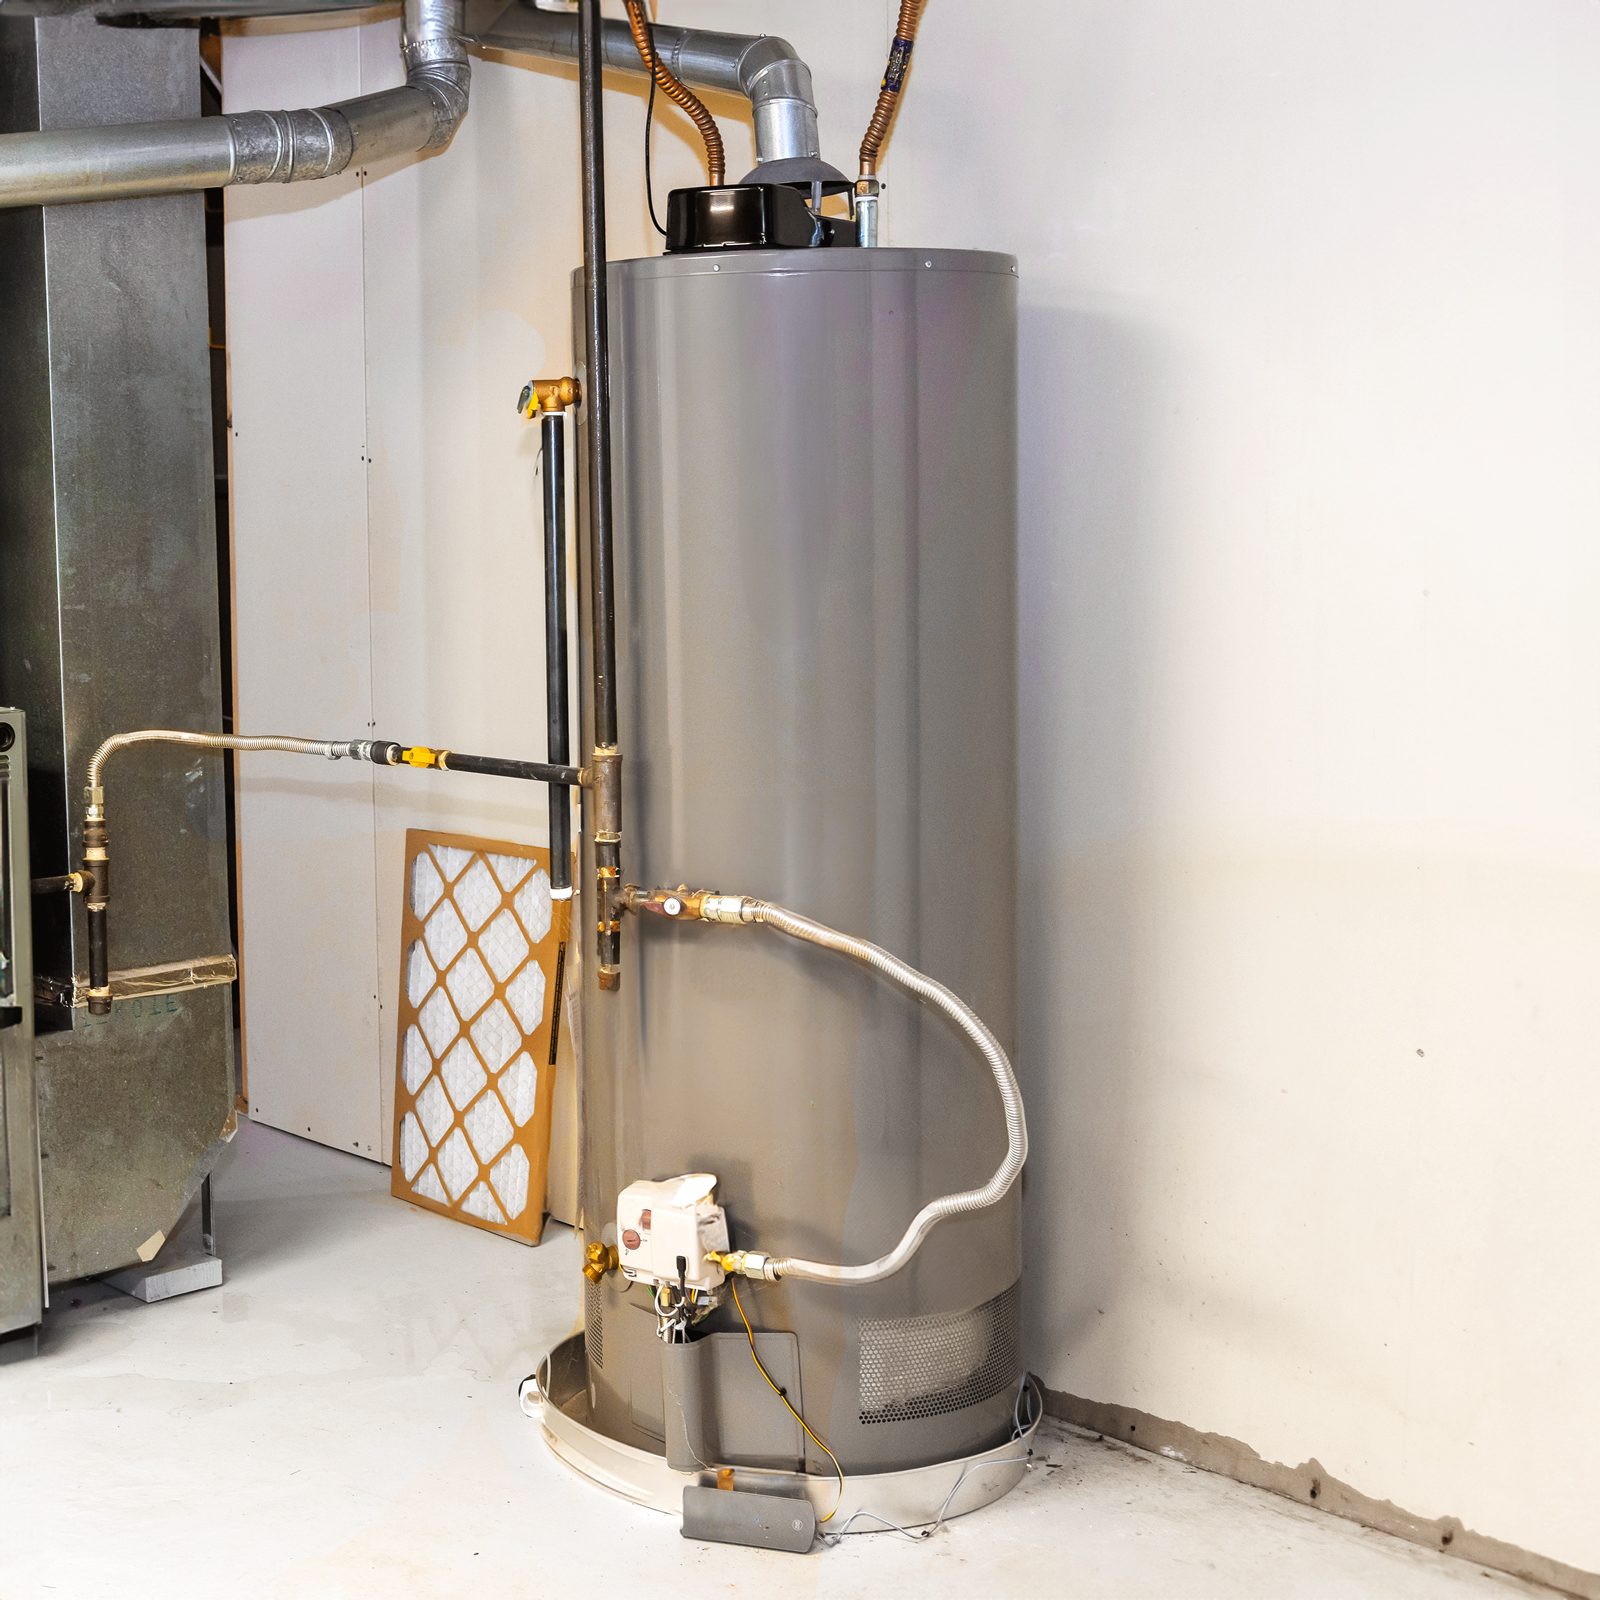 How To Choose a New Water Heater